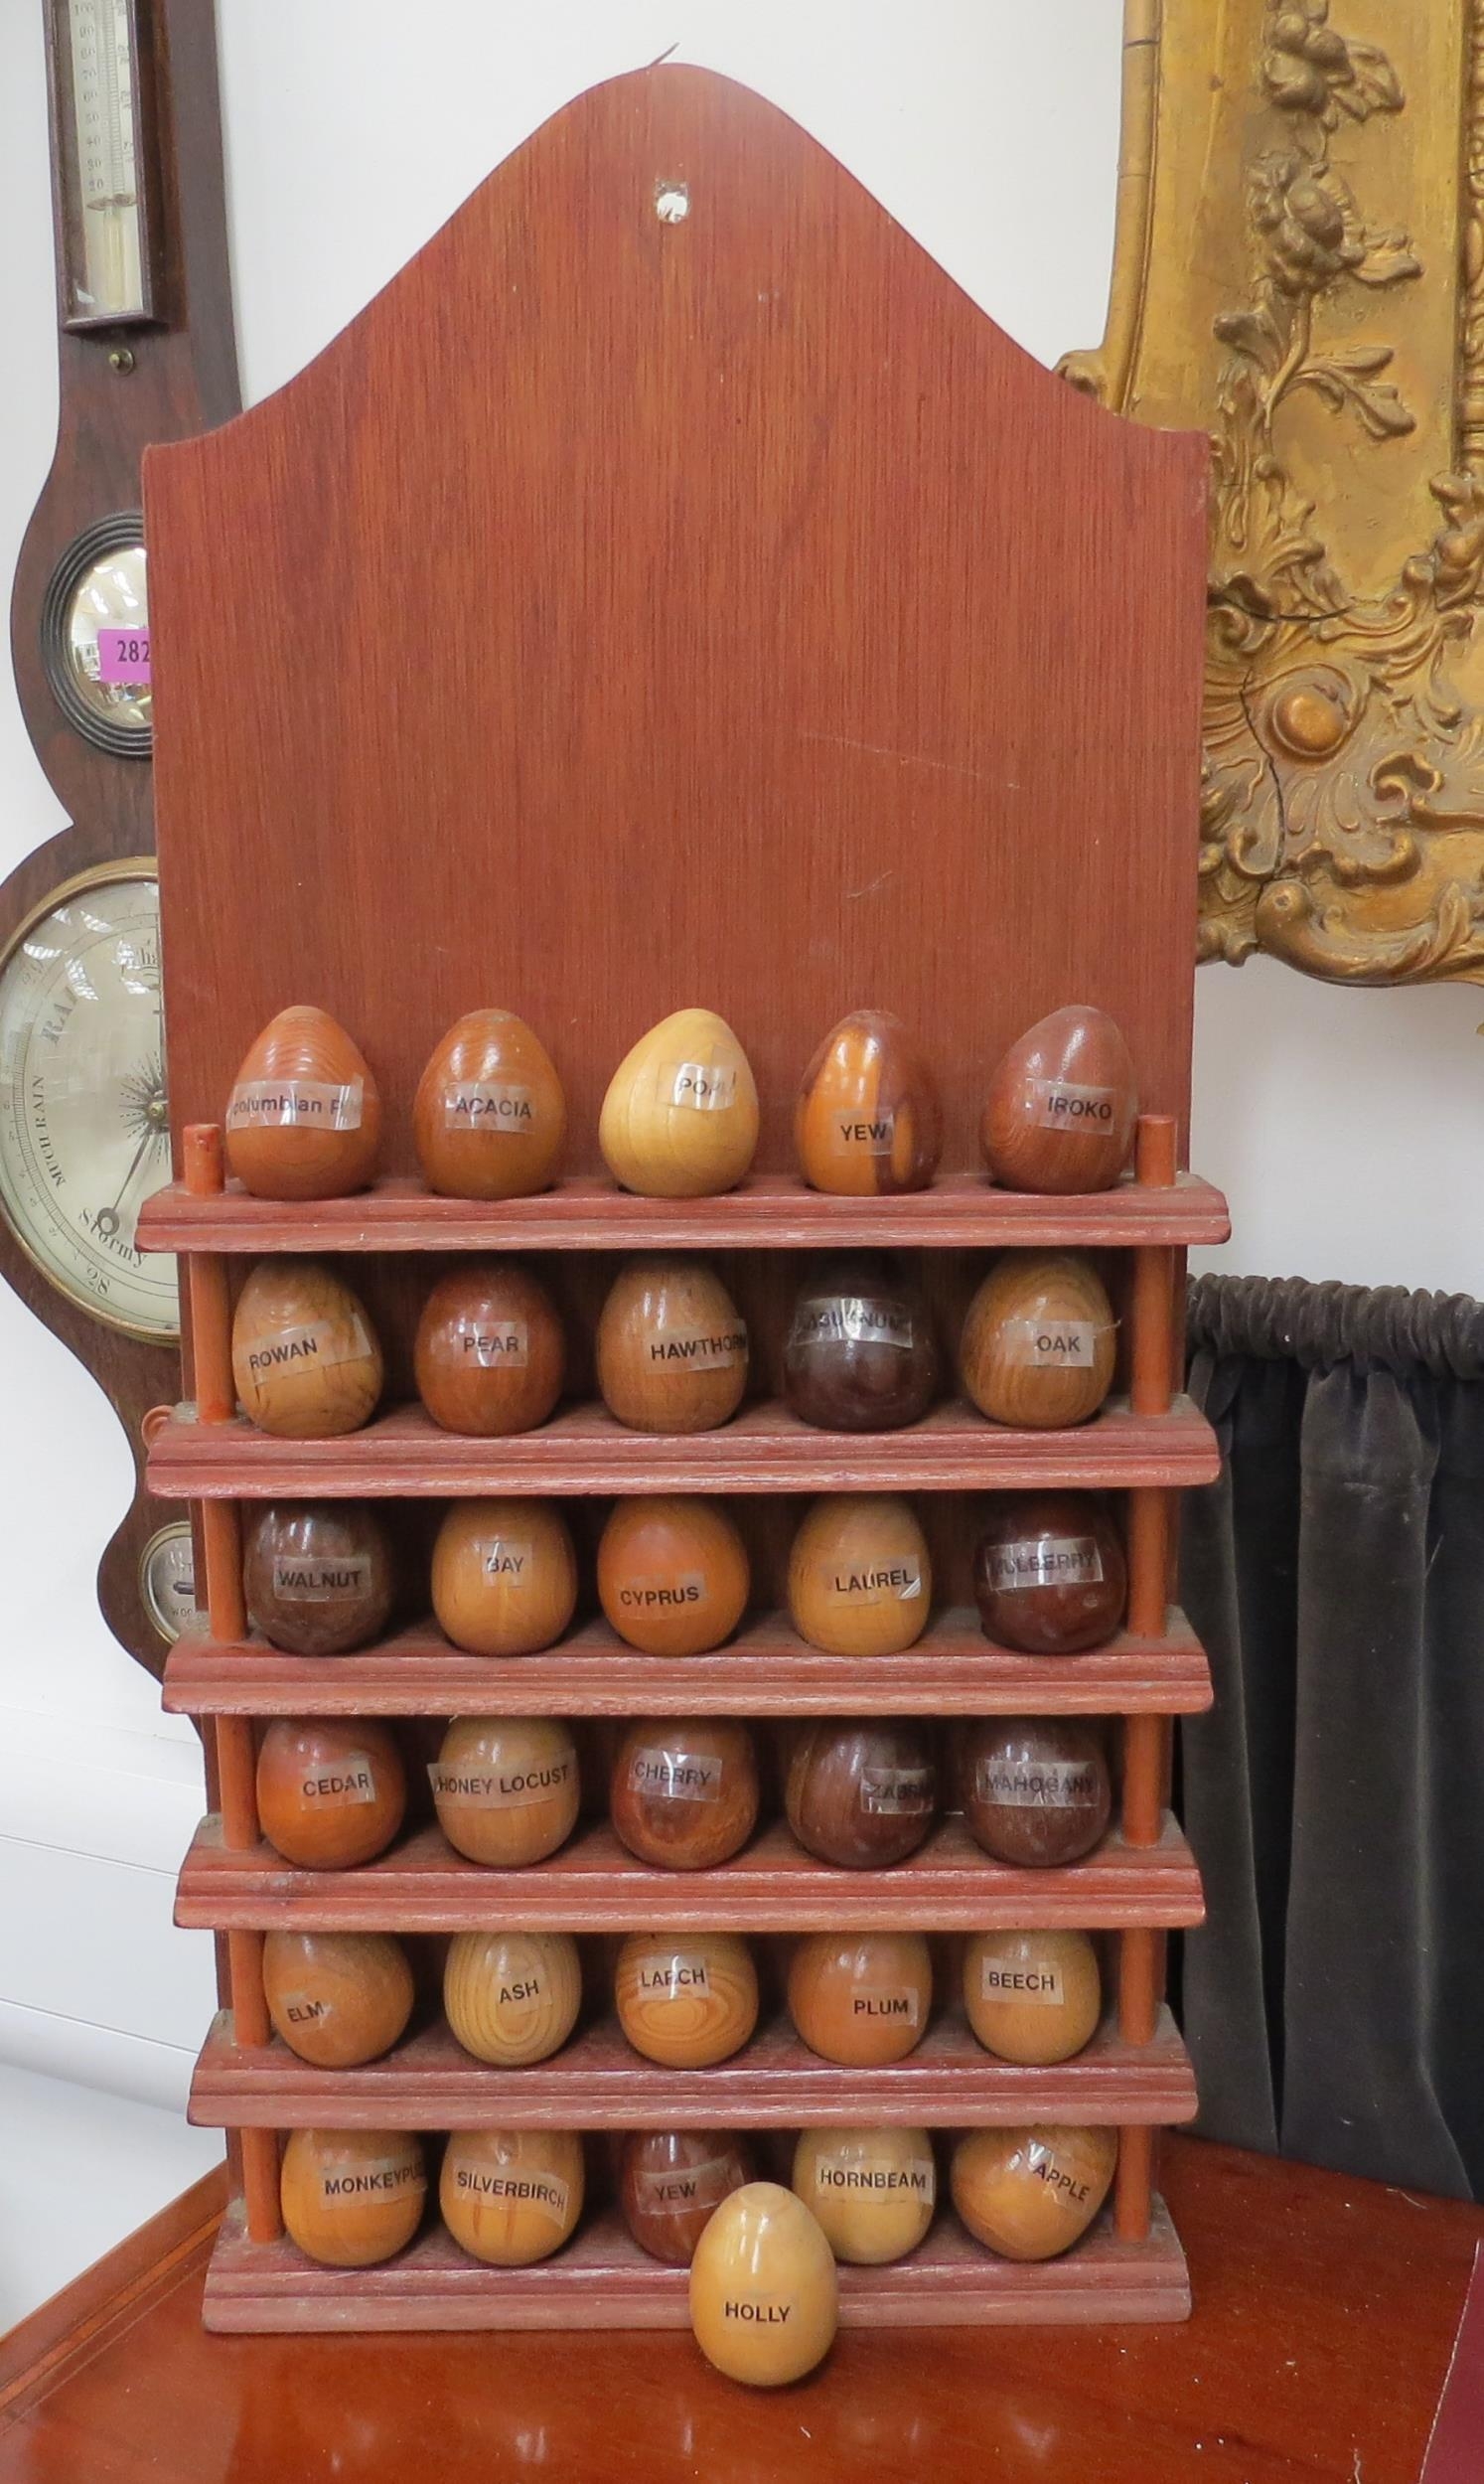 A wall hanging display of named specimen wood eggs, 26 in total